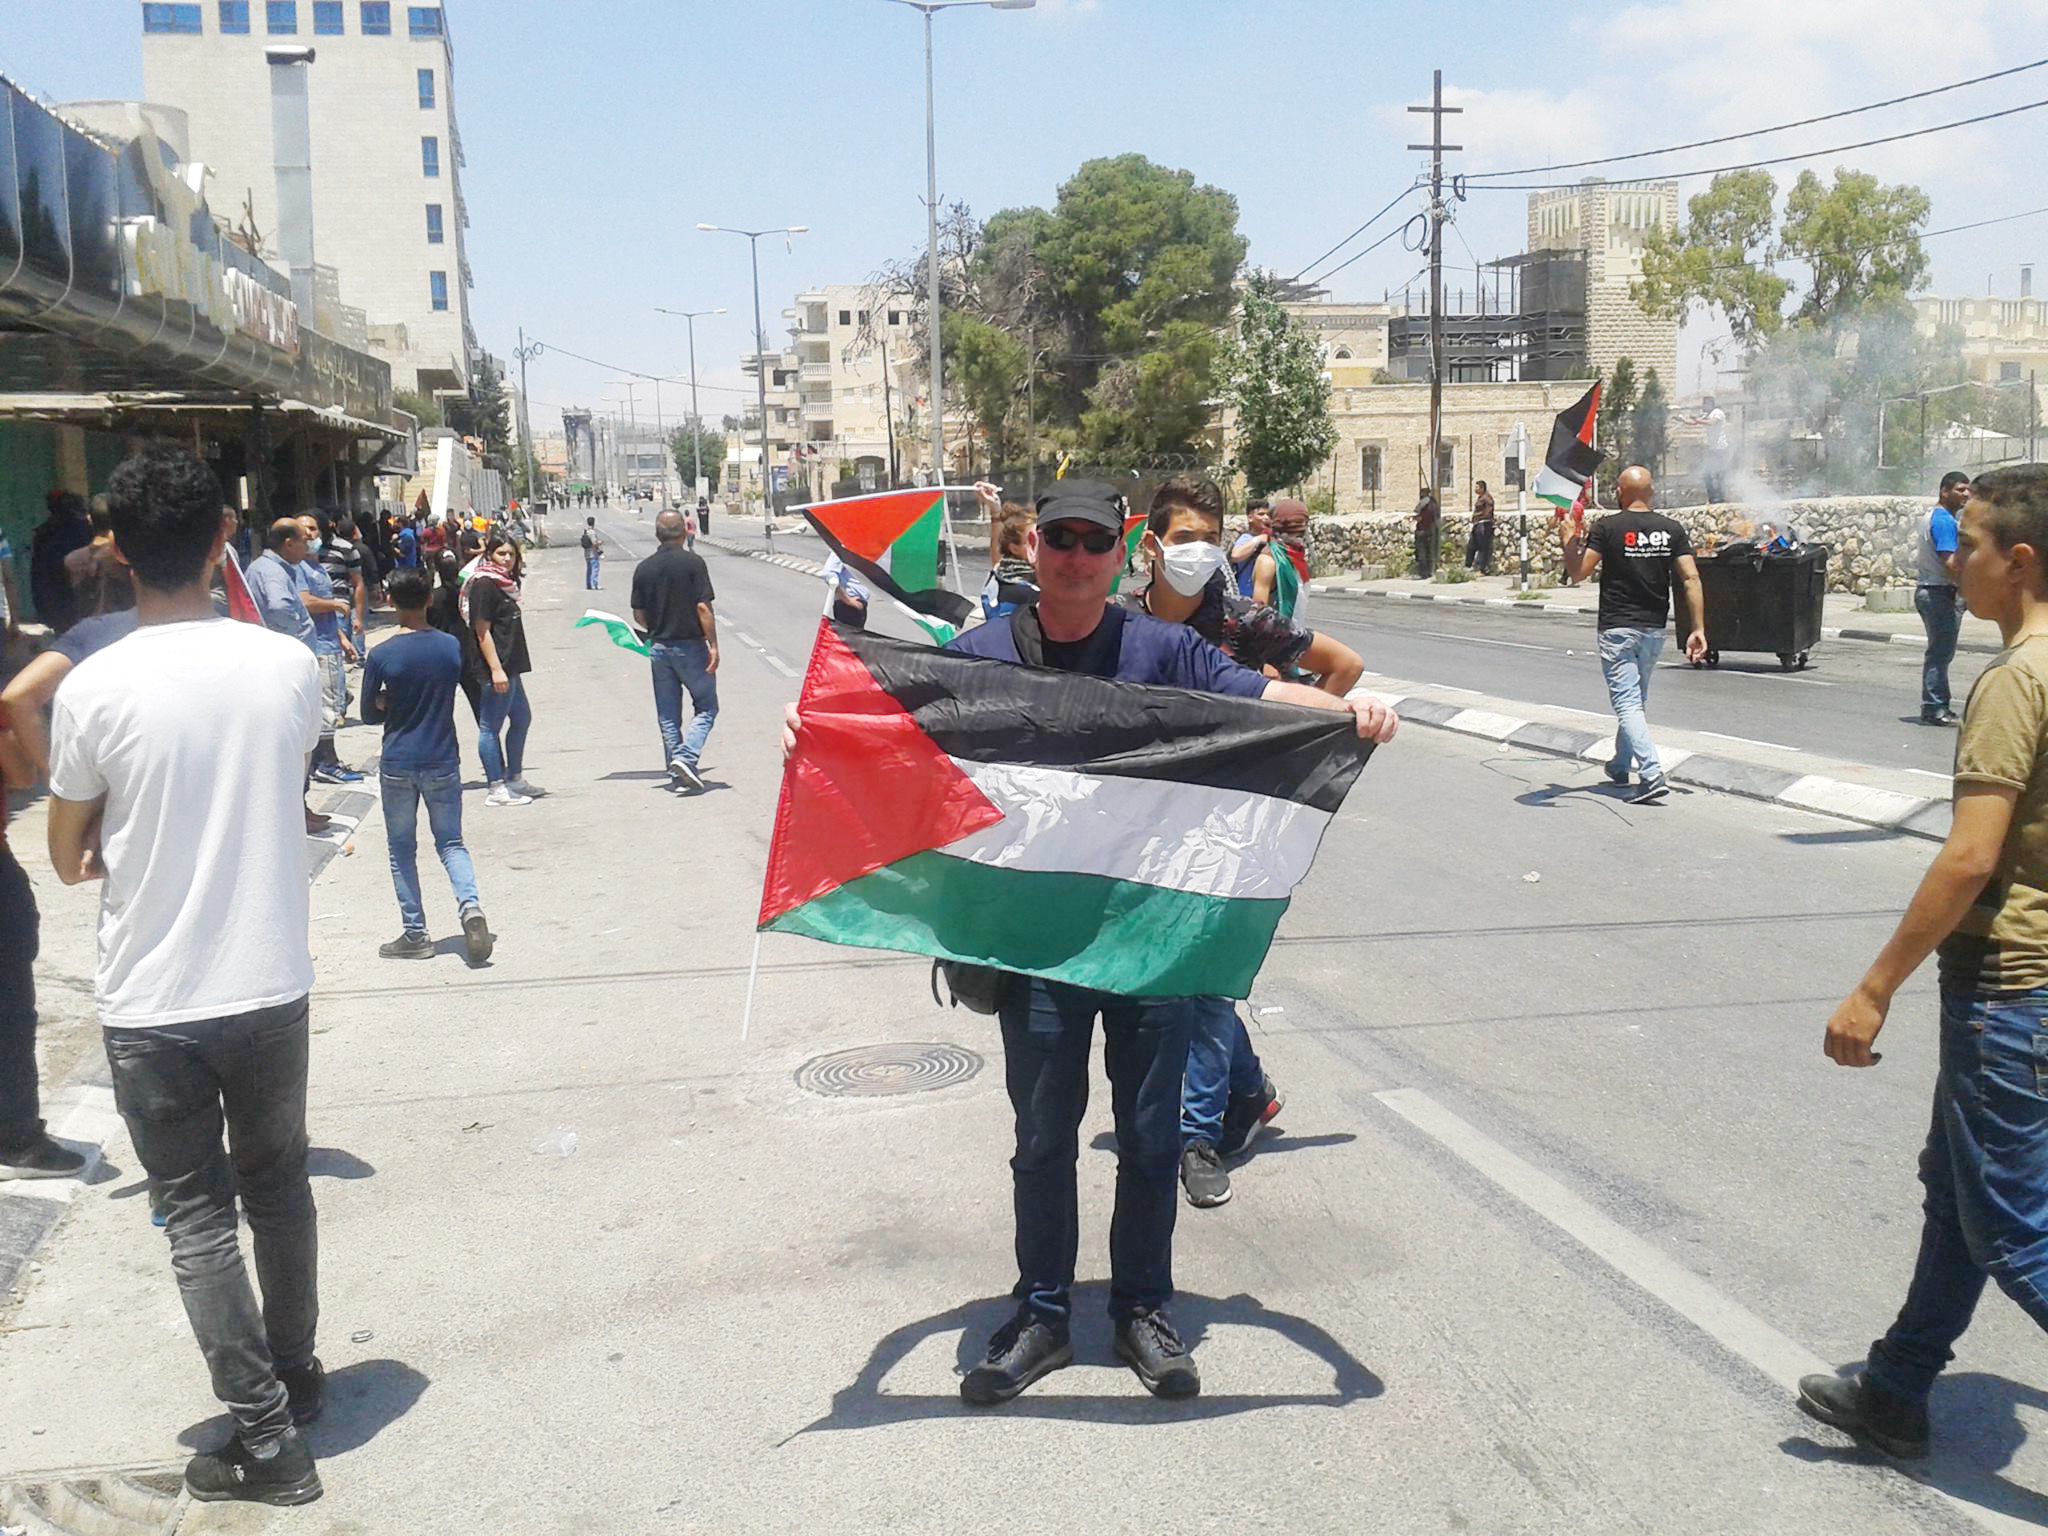 UP CLOSE: Fra Hughes at the protest near Bethlehem during a week of violence